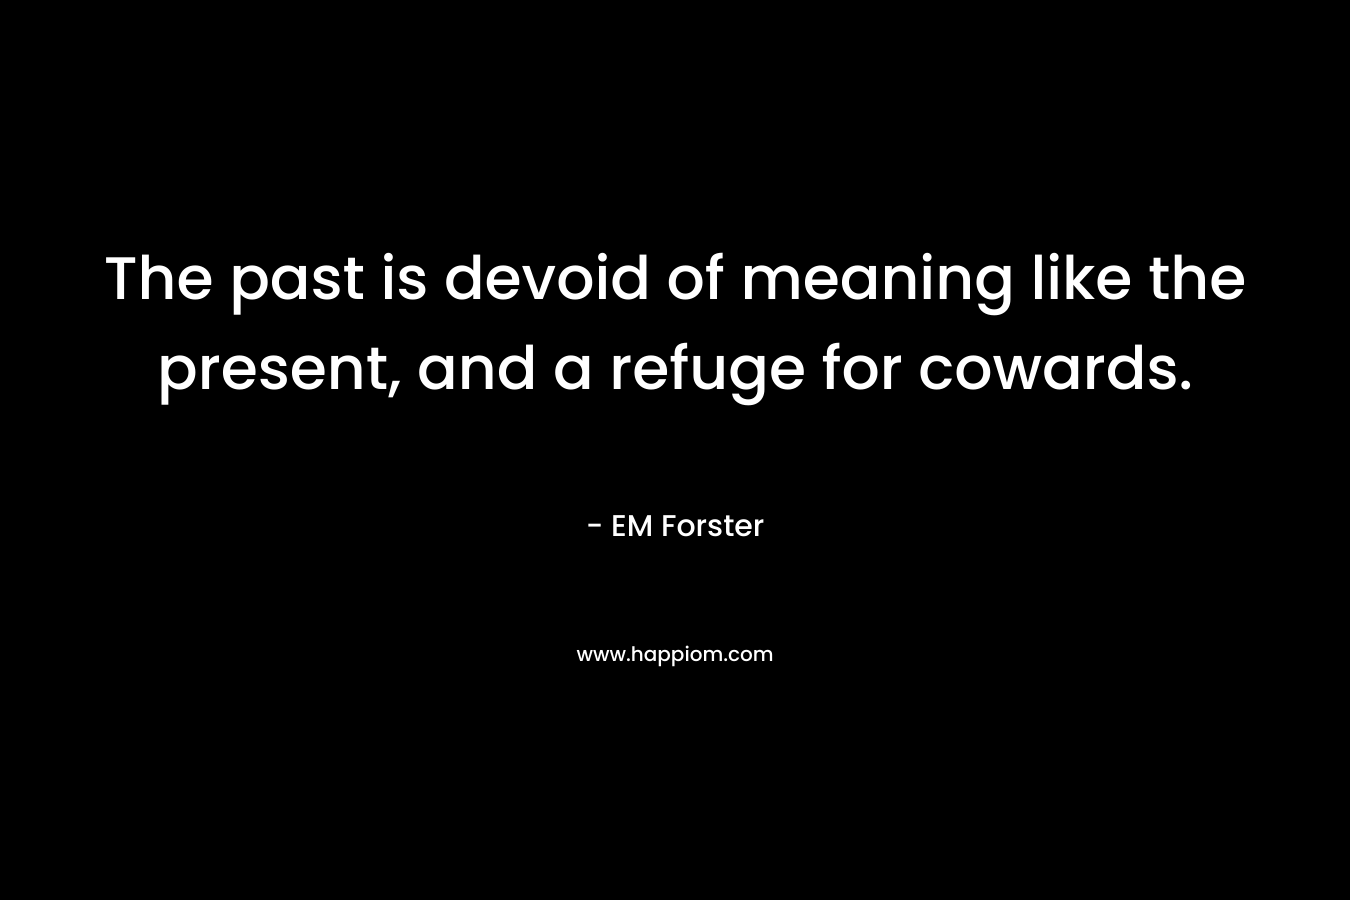 The past is devoid of meaning like the present, and a refuge for cowards.